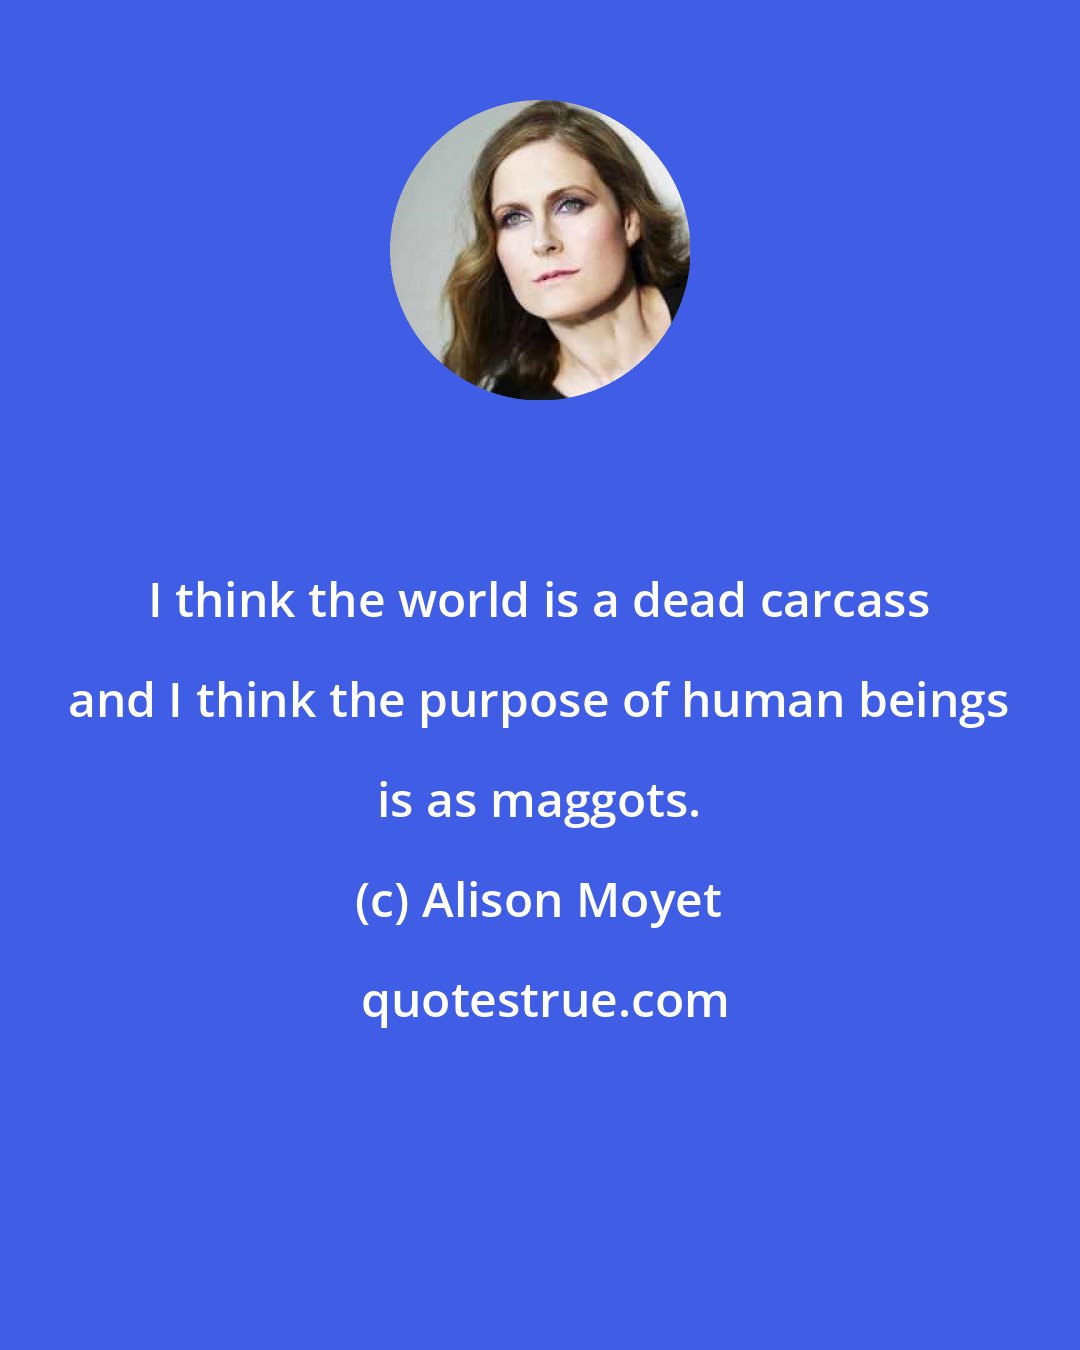 Alison Moyet: I think the world is a dead carcass and I think the purpose of human beings is as maggots.